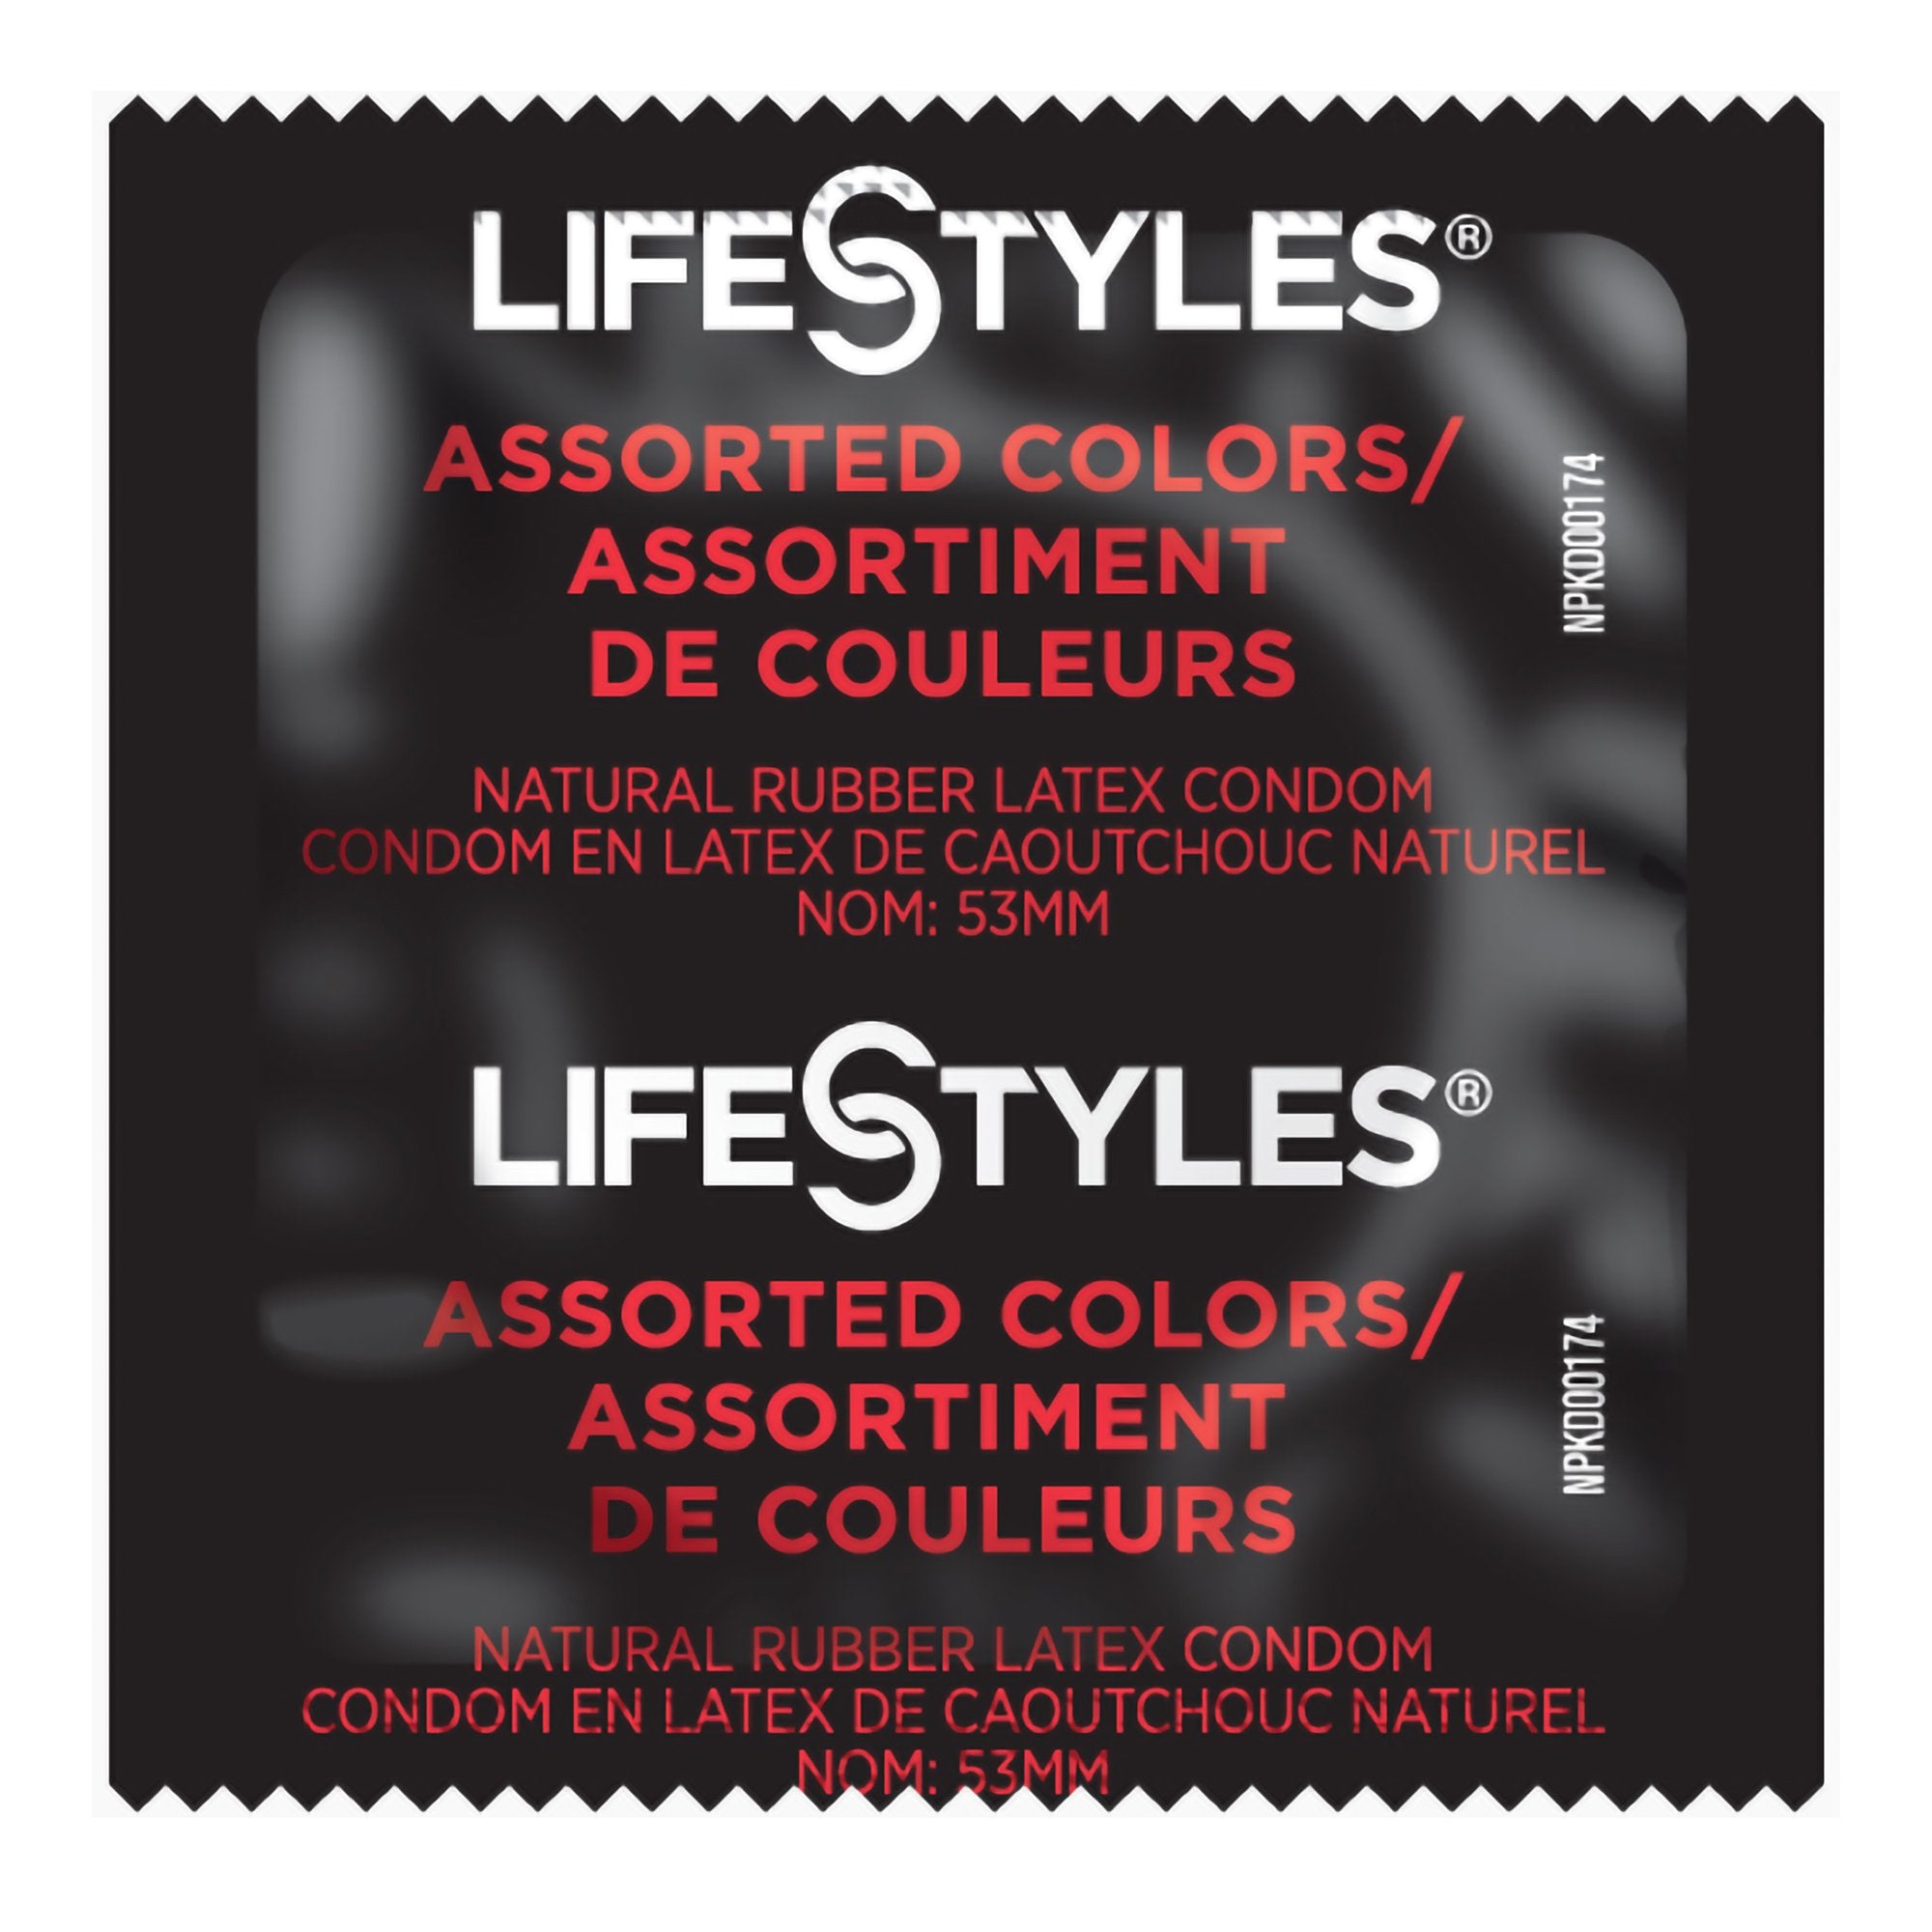 Lifestyles® Assorted Colors Lubricated Condom (1 Unit)